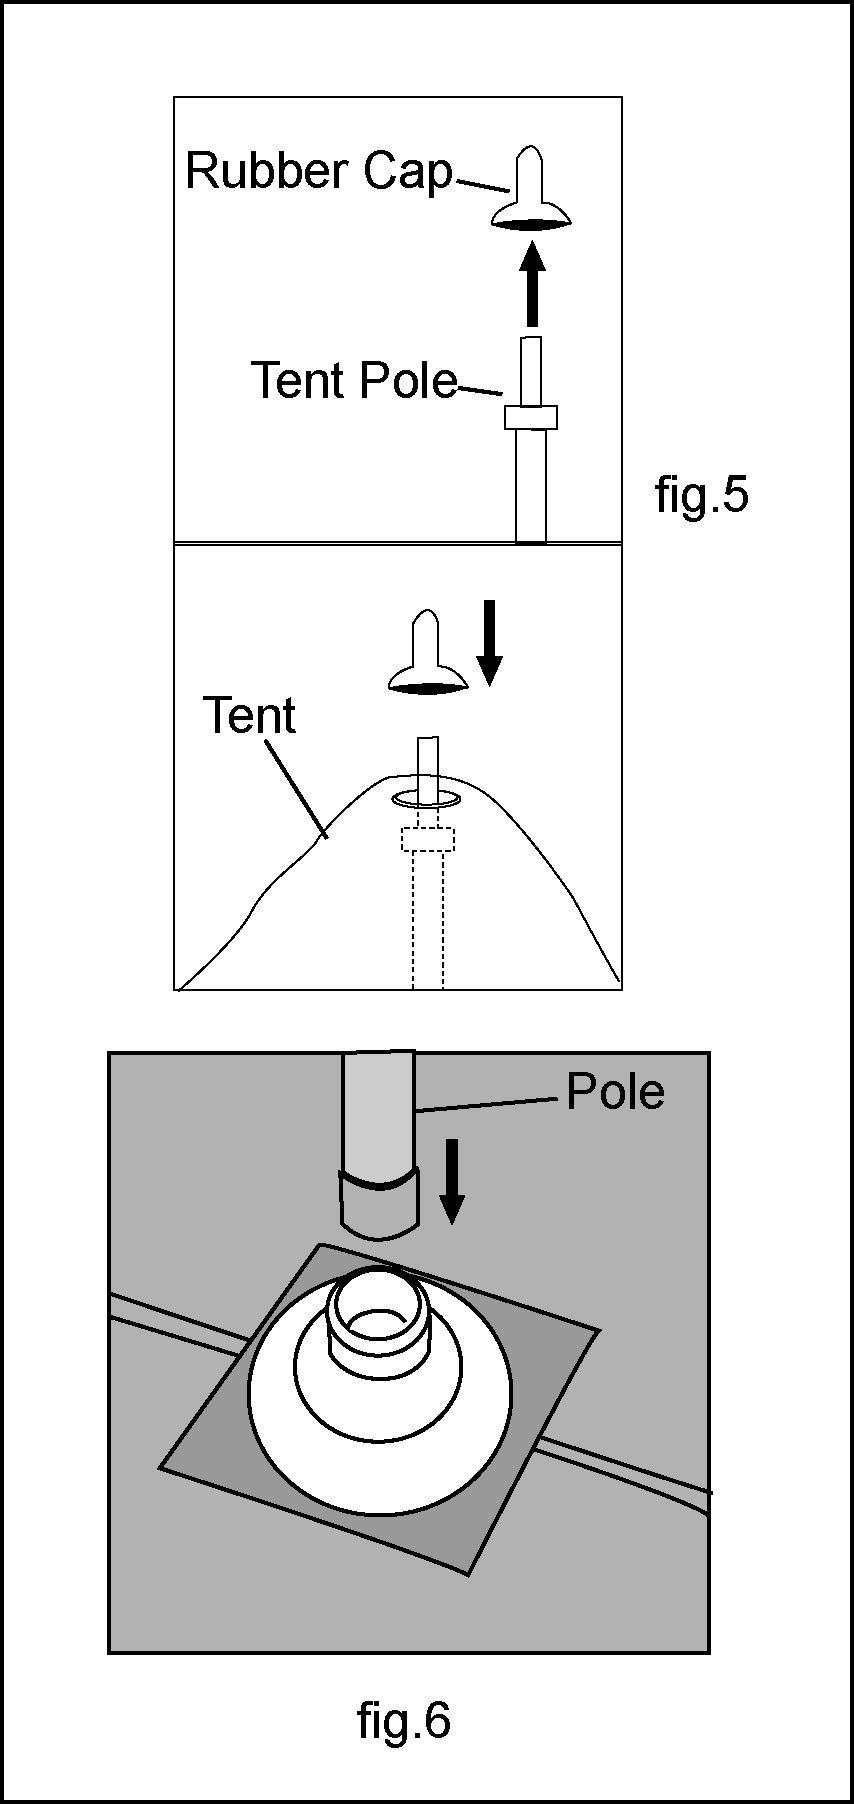 Stage 3 Erecting the Teepee 1. Unzip the teepee door 2. Remove the cap from the central tent pole as shown in fig. 5 3.